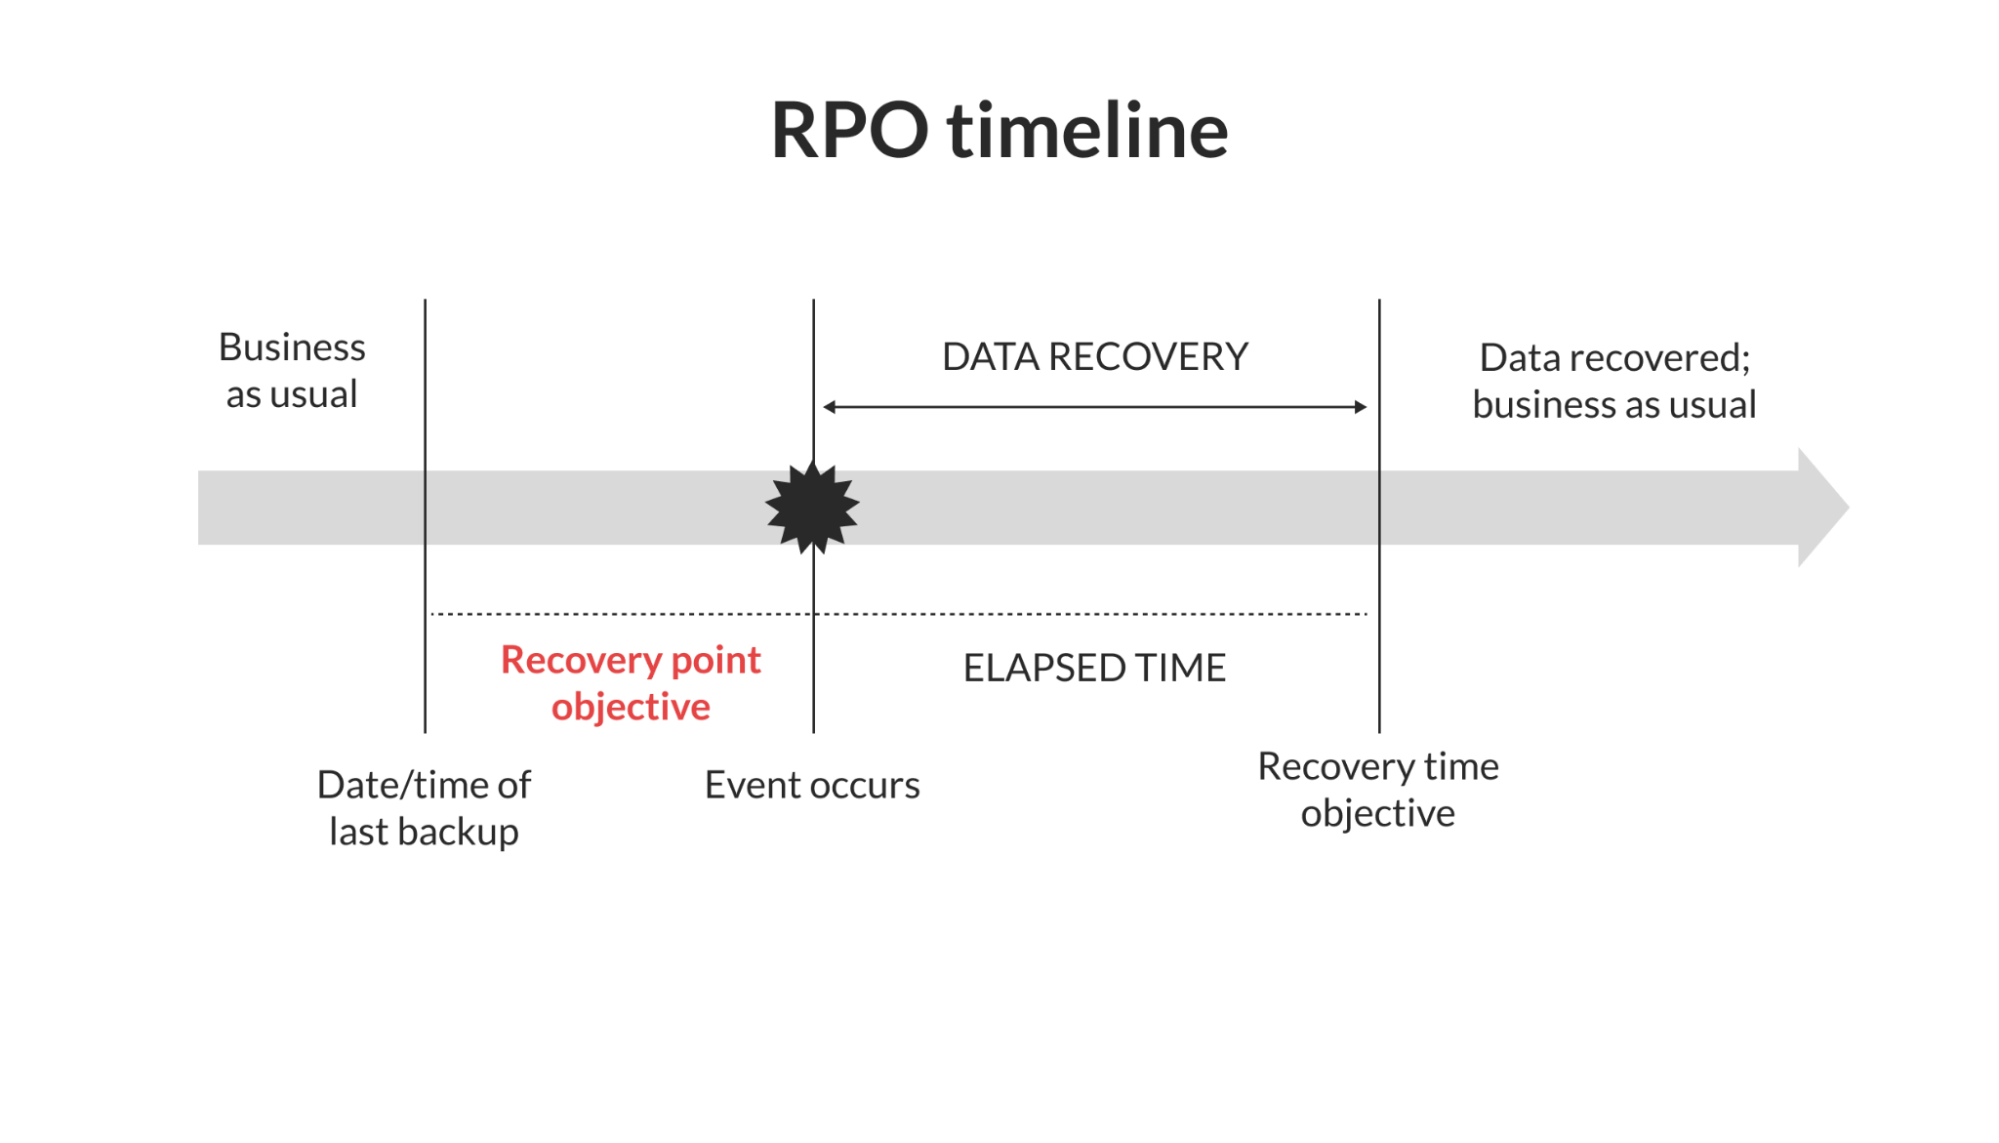 Timeline showing where RPO fits into a recovery event